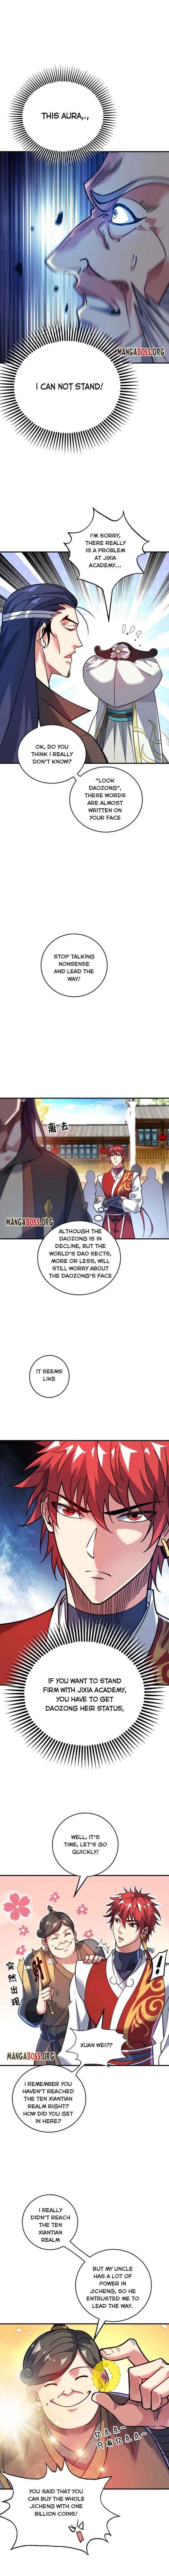 The First Son-In-Law Vanguard of All Time Chapter 145 page 4